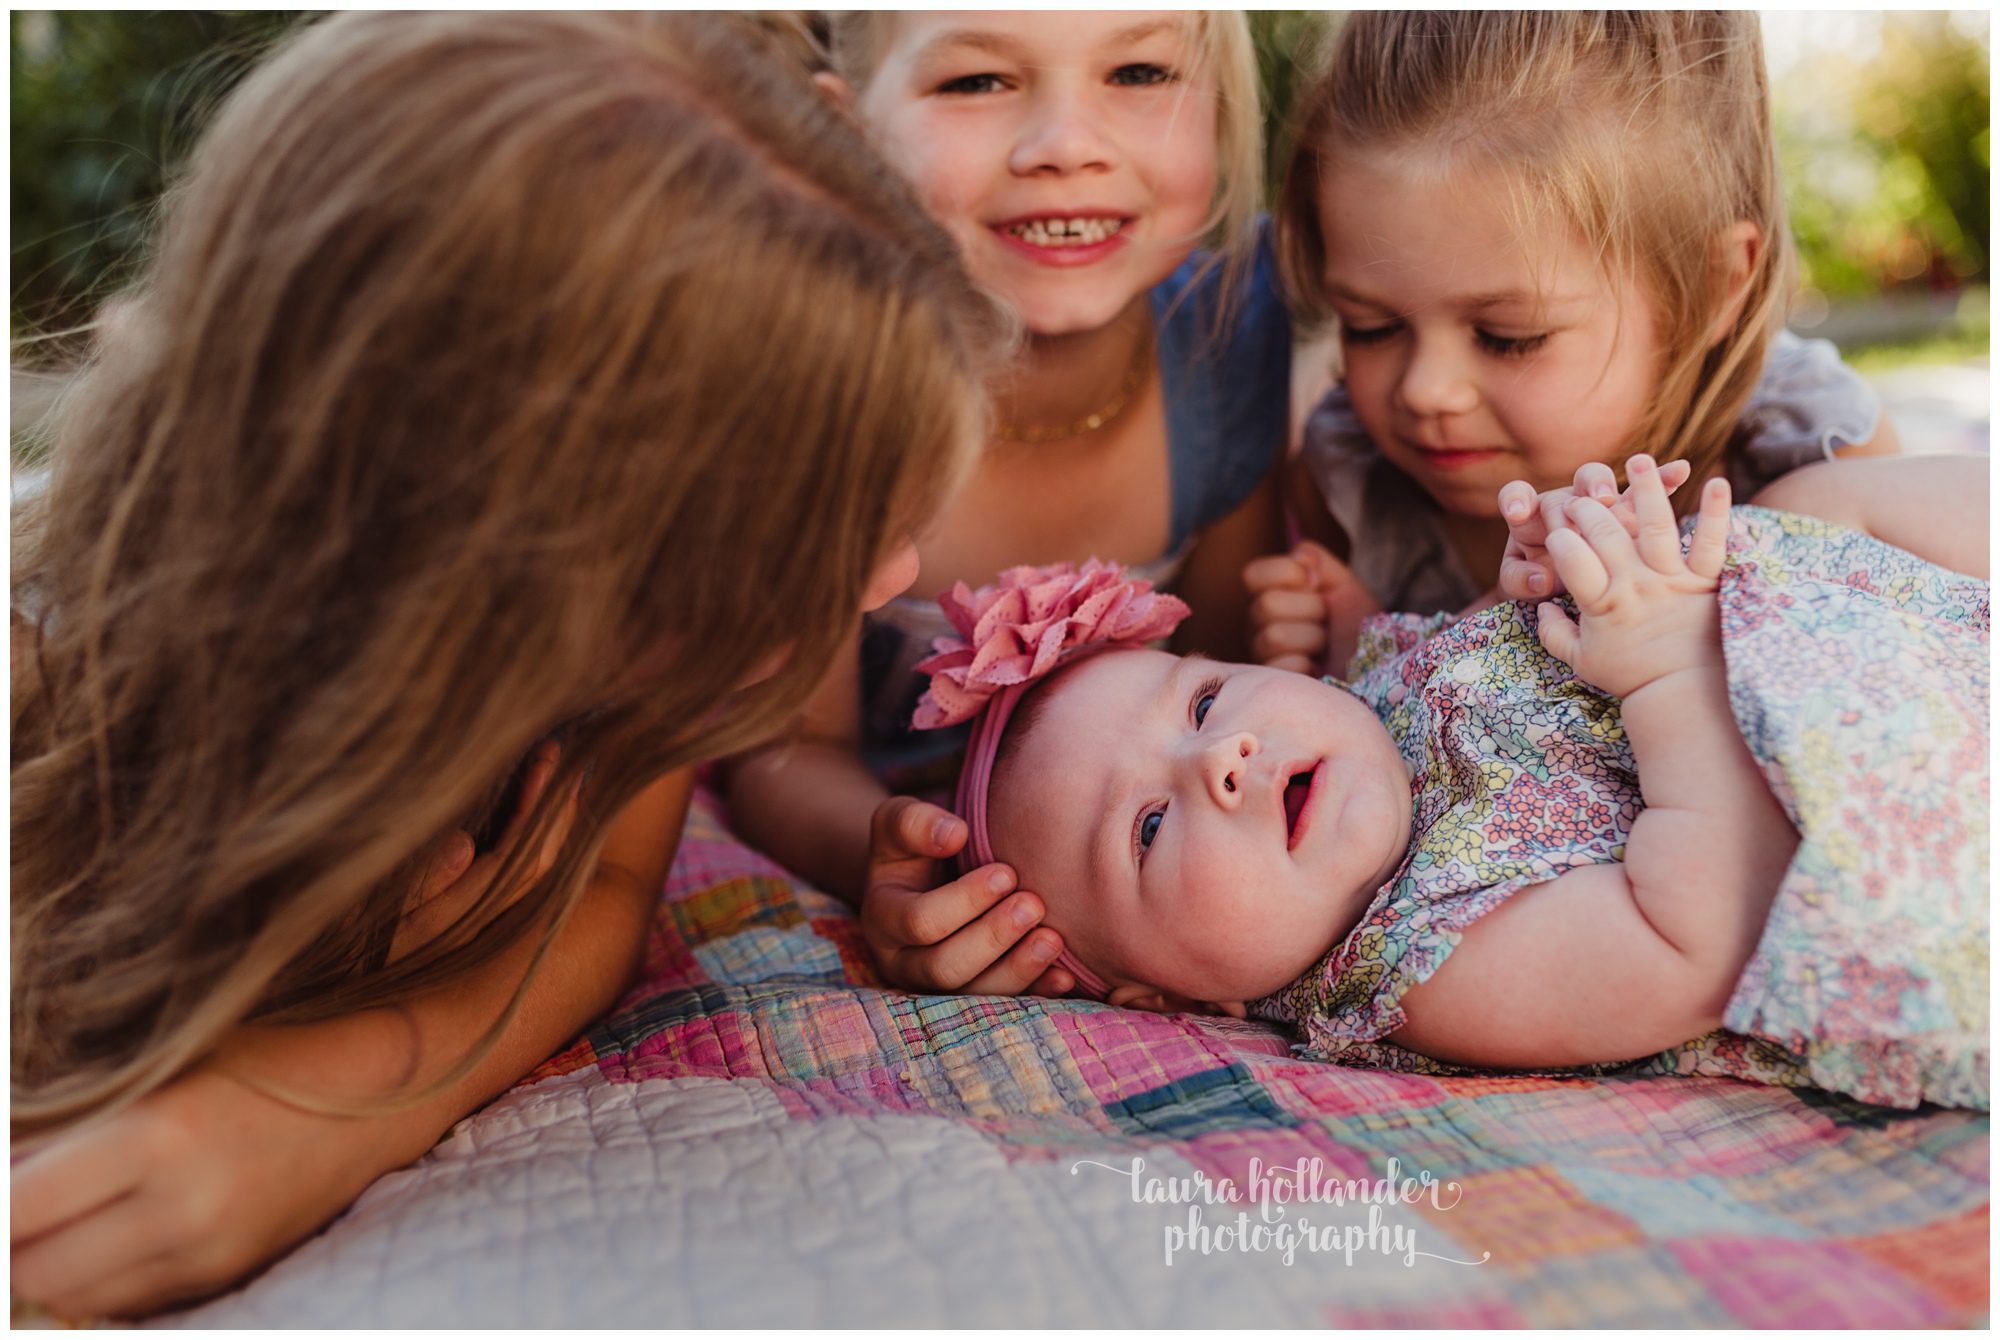 family of 6, four daughters, family portraits with quilt backdrop, Laura Hollander Photography Battle Creek MI